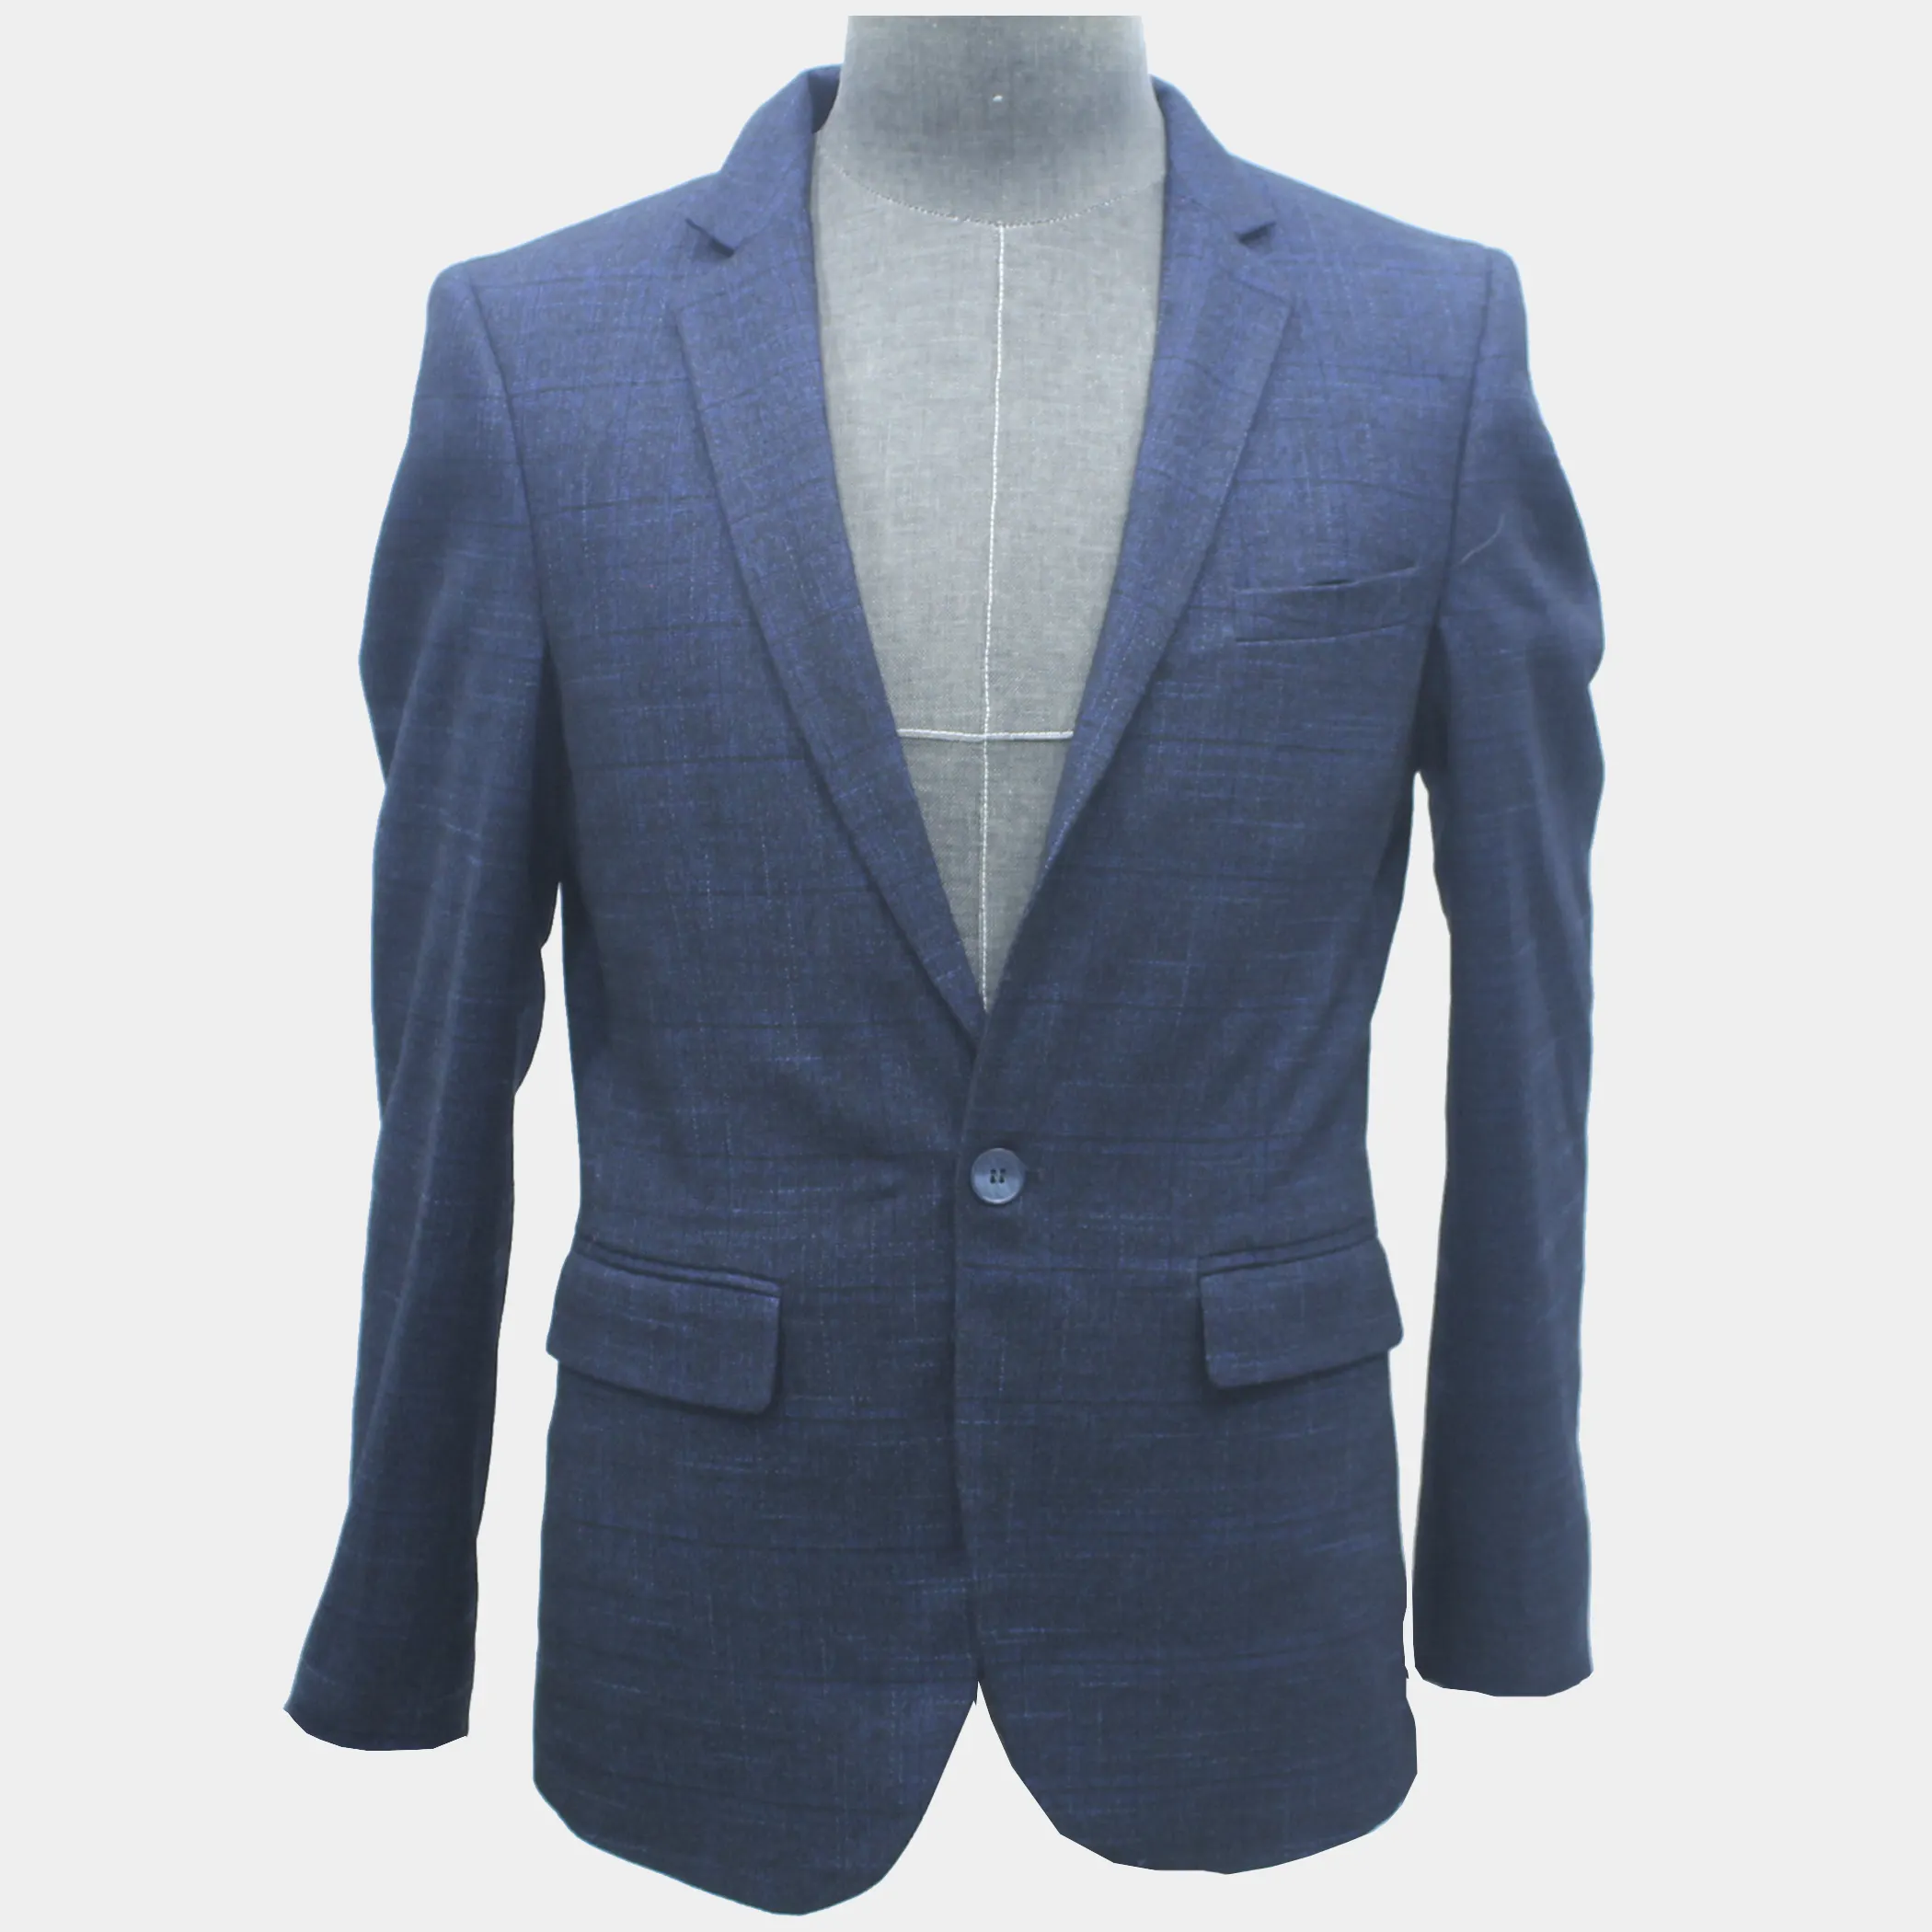 Haute couture Slim Fit Blazer for Men Single Breasted Business Casual Jackets suit for men